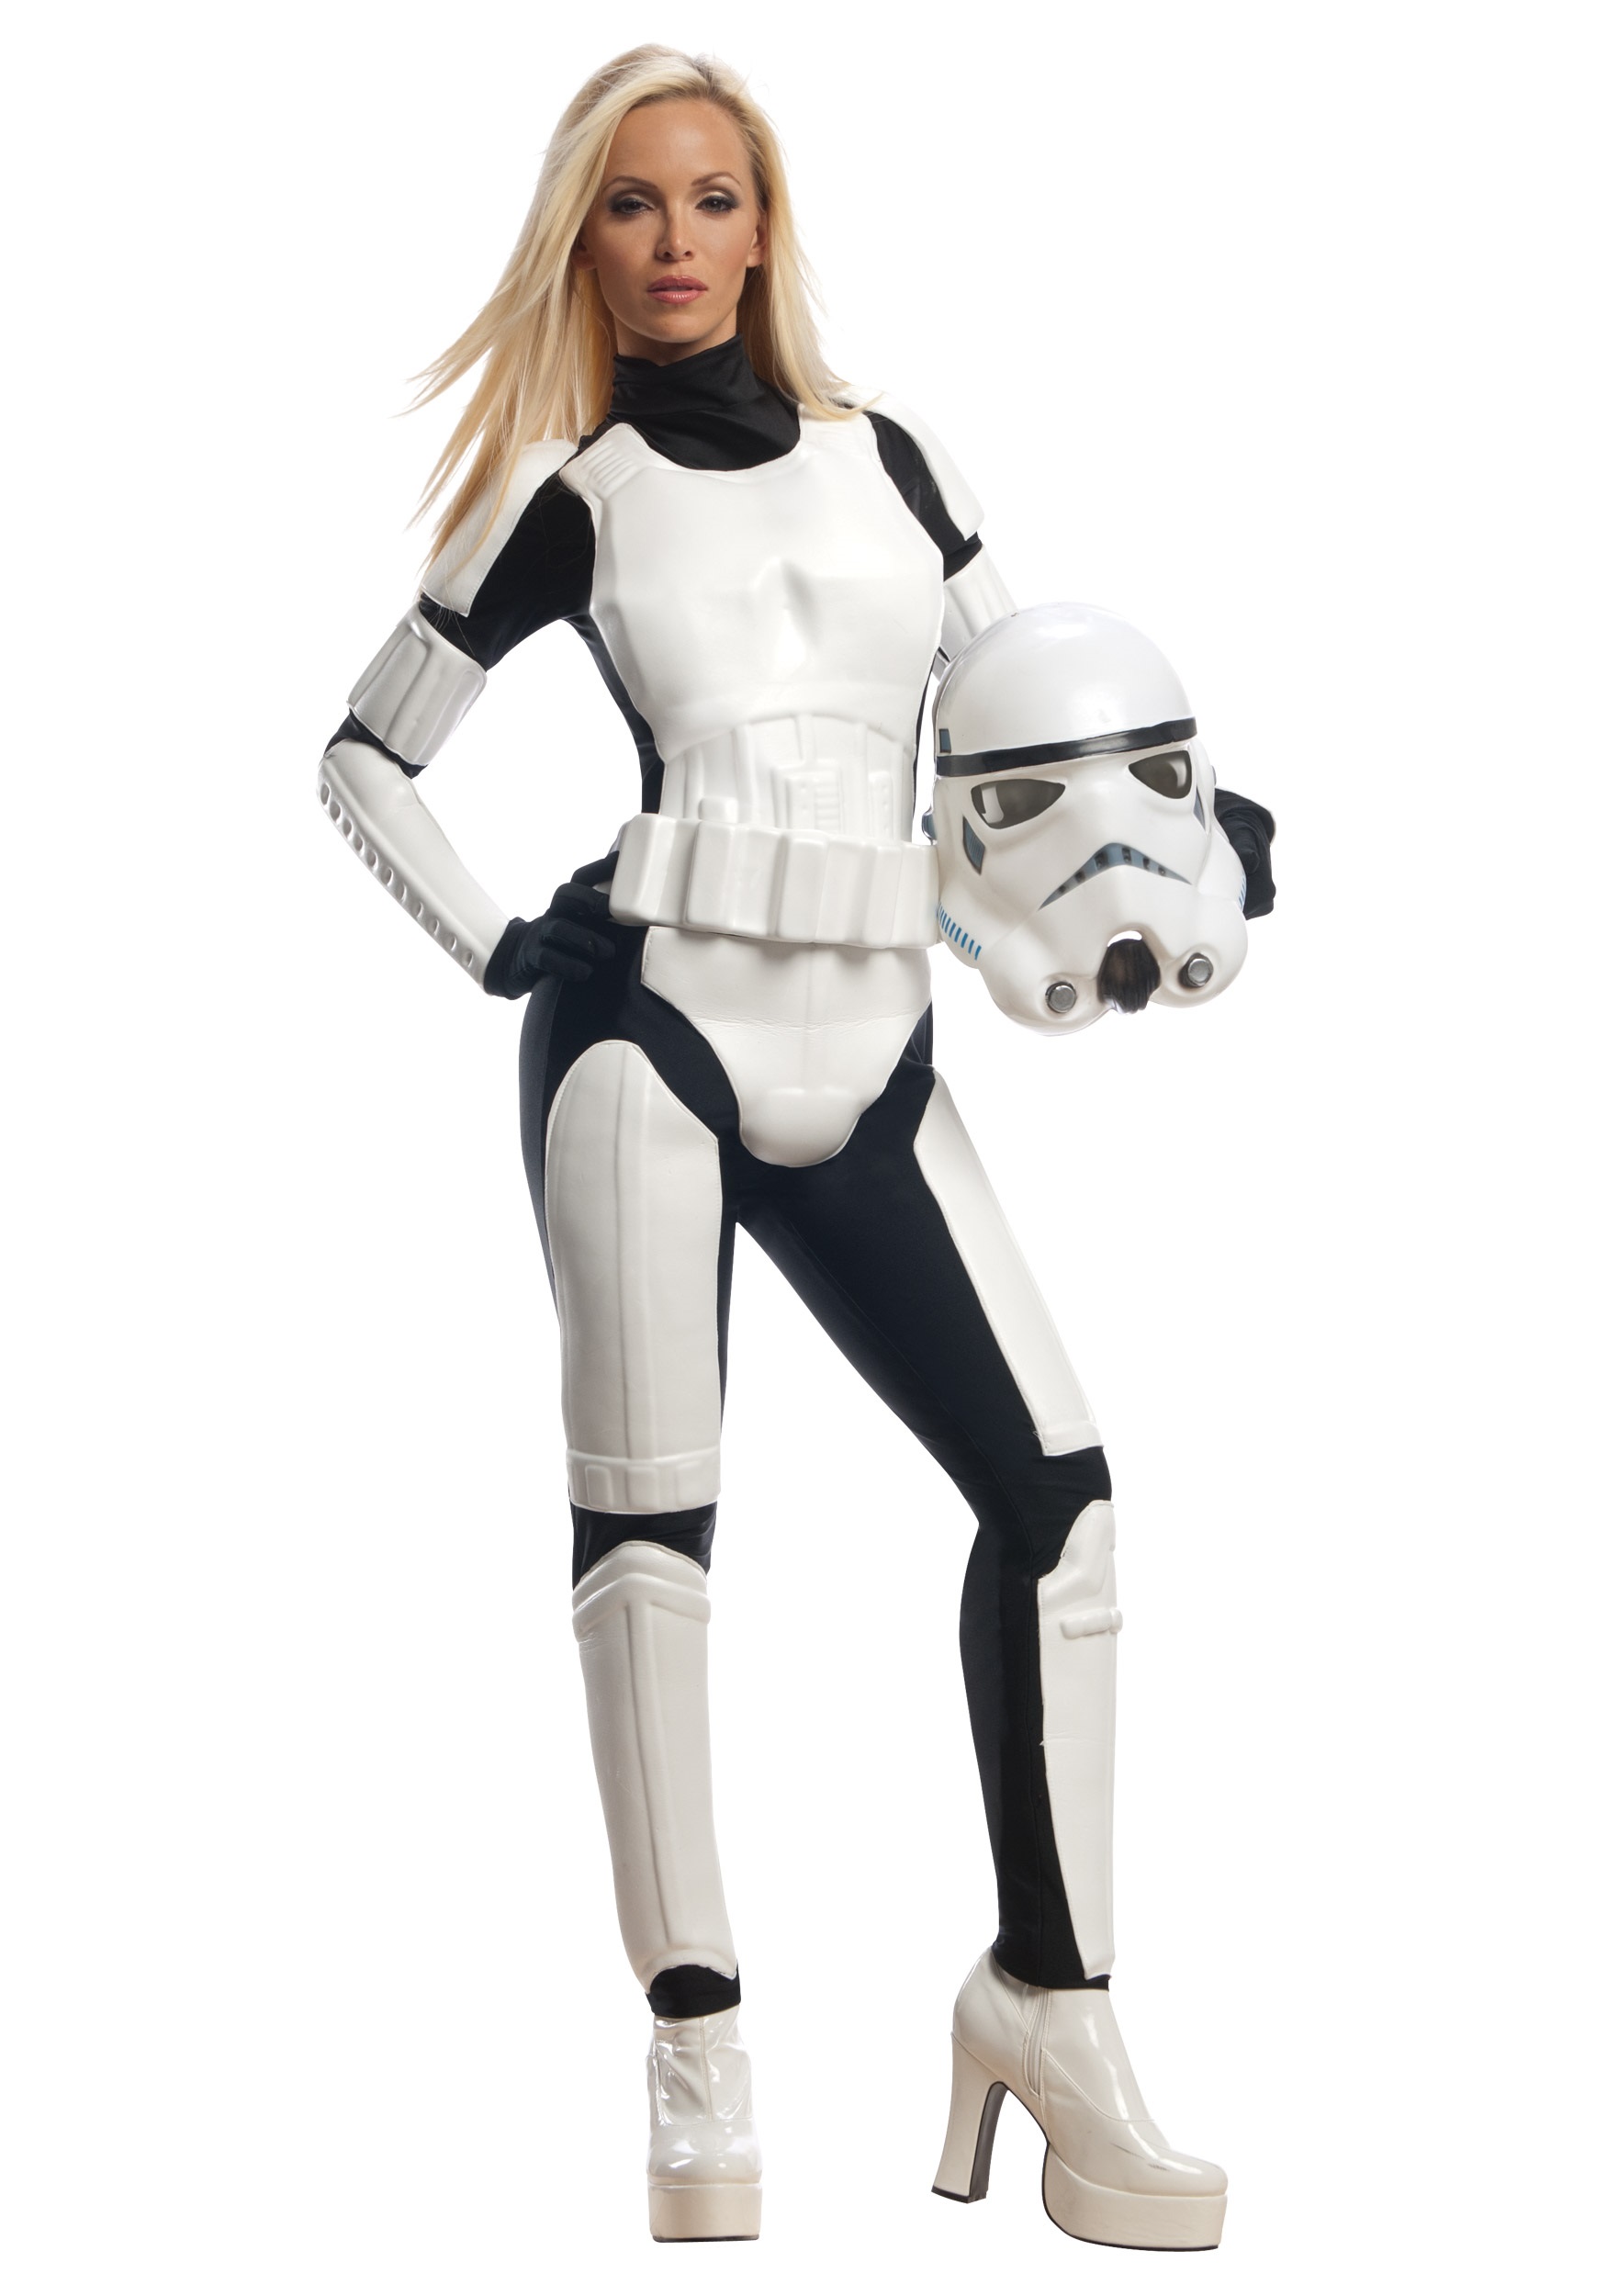 Female Stormtrooper Costume - Picture 1 of 1